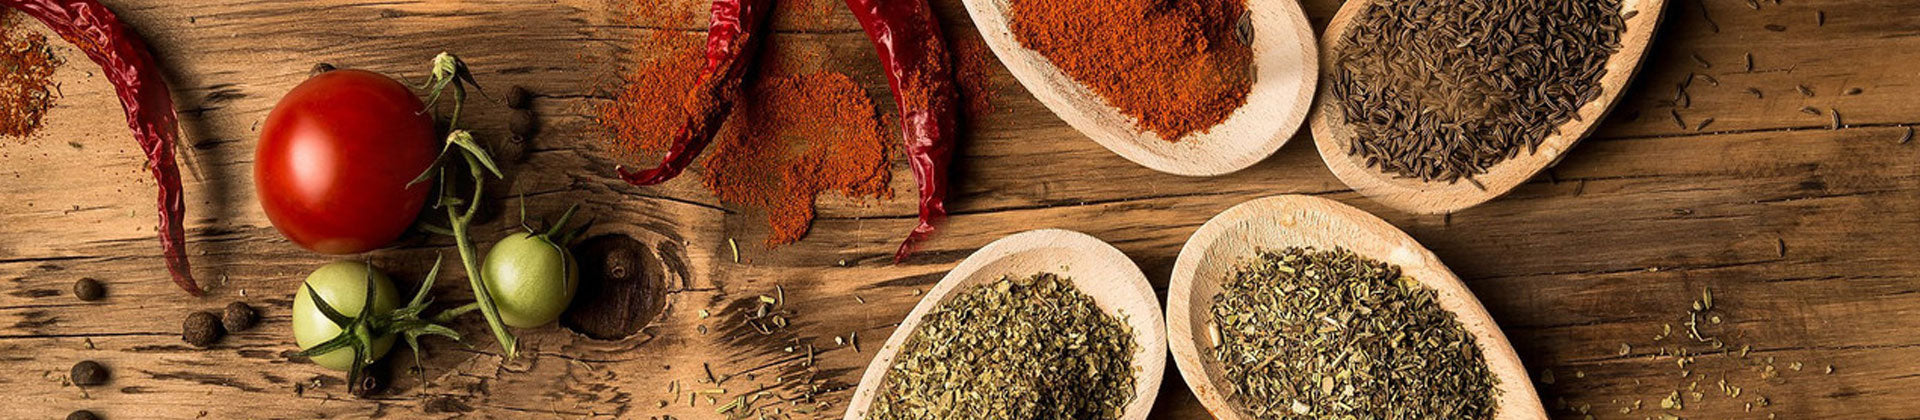 mixed spices & seasoning